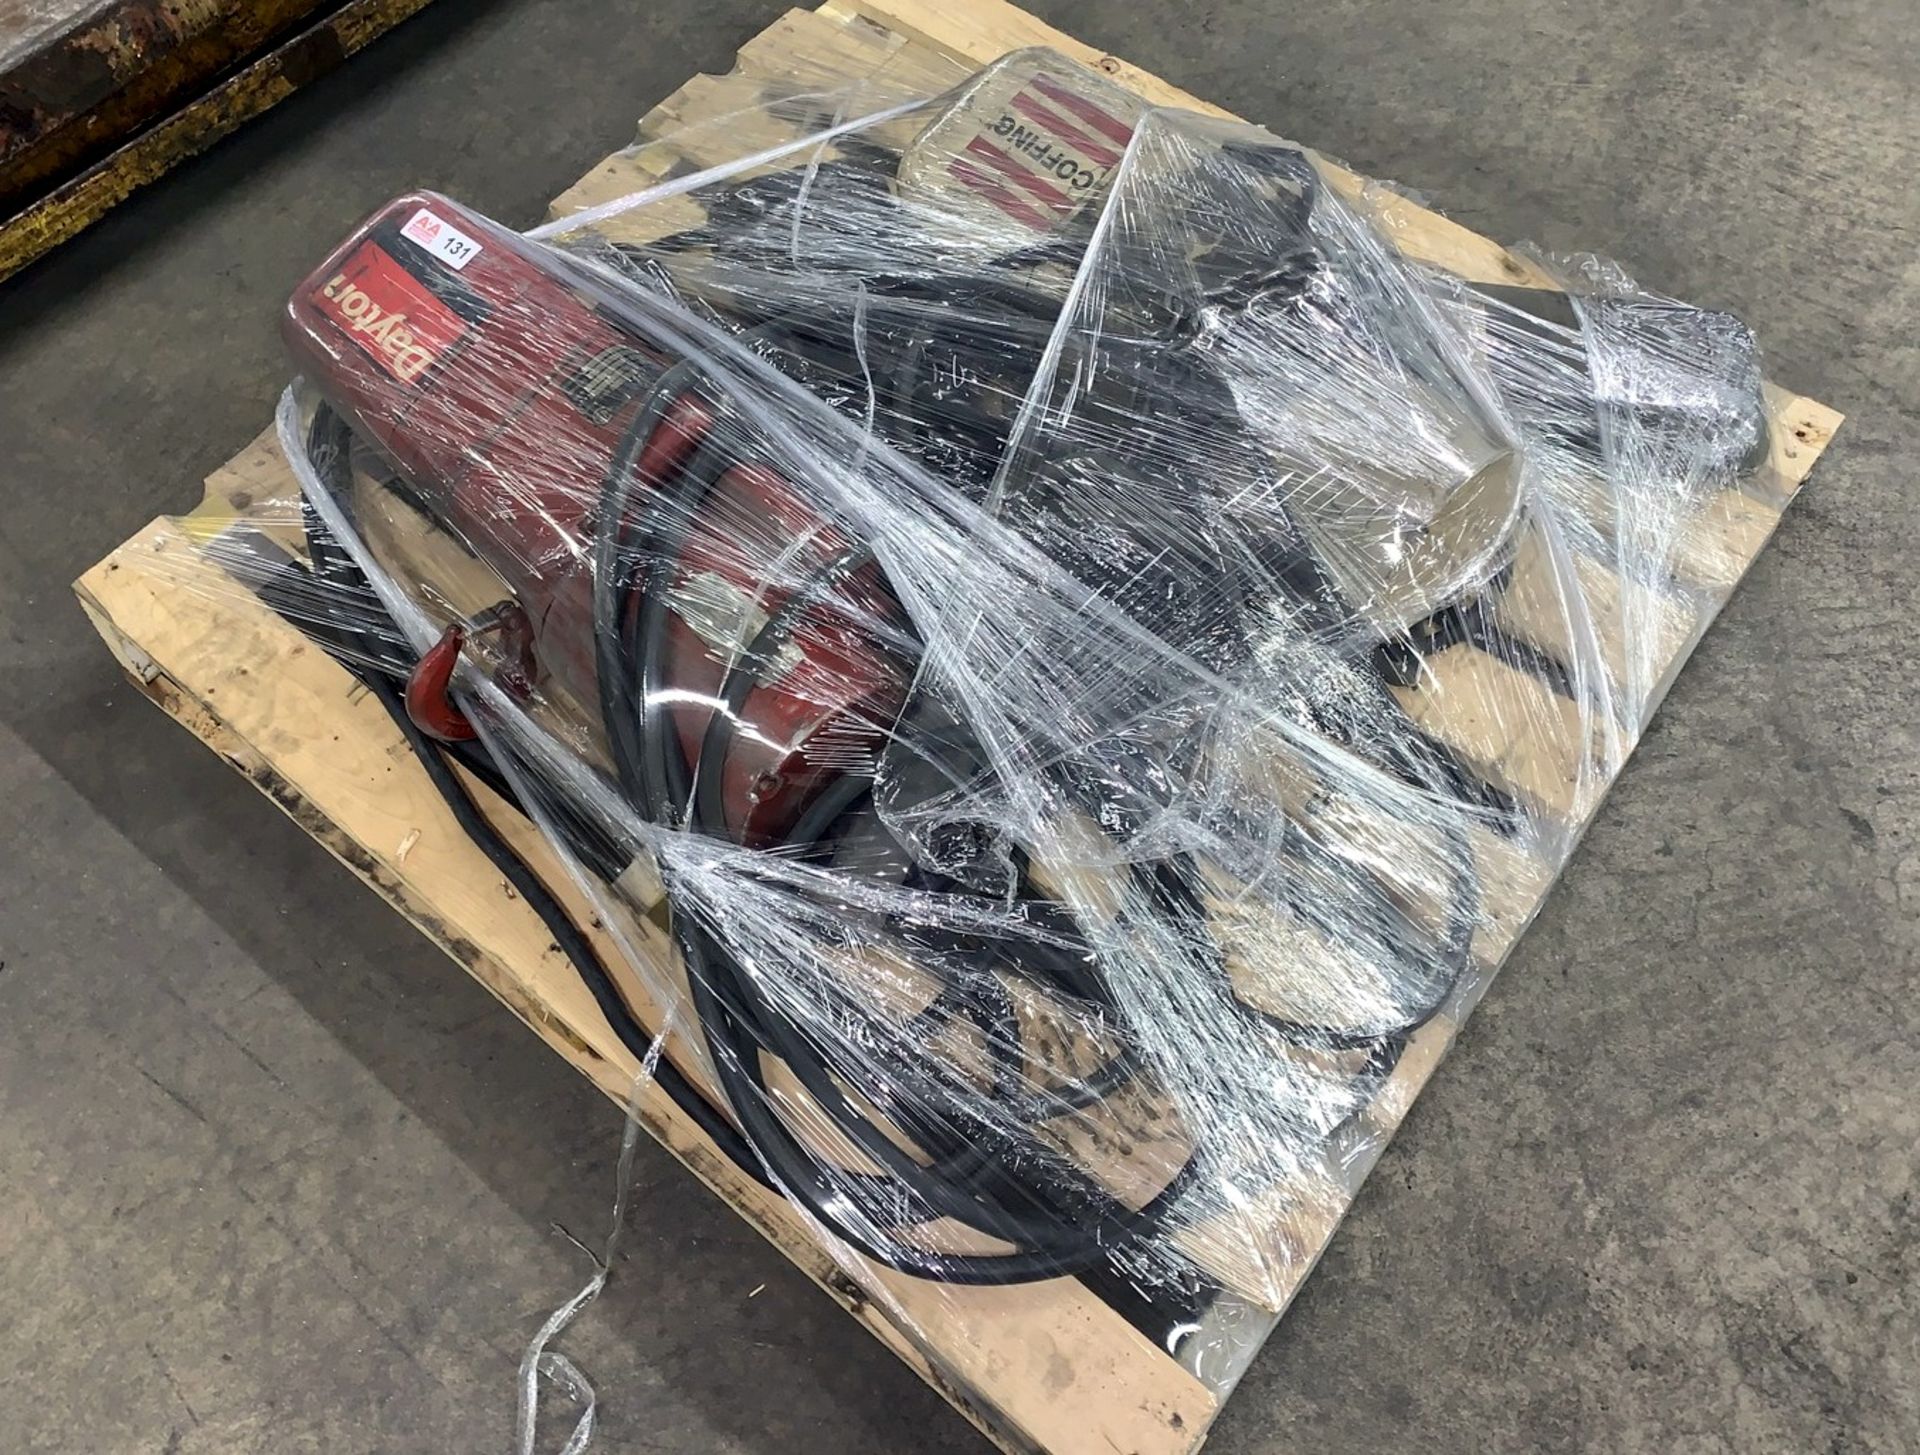 Pallet including a Dayton 1-Ton Electric Chain Hoist and Coffing 1-Ton Electric Chain Hoist (All